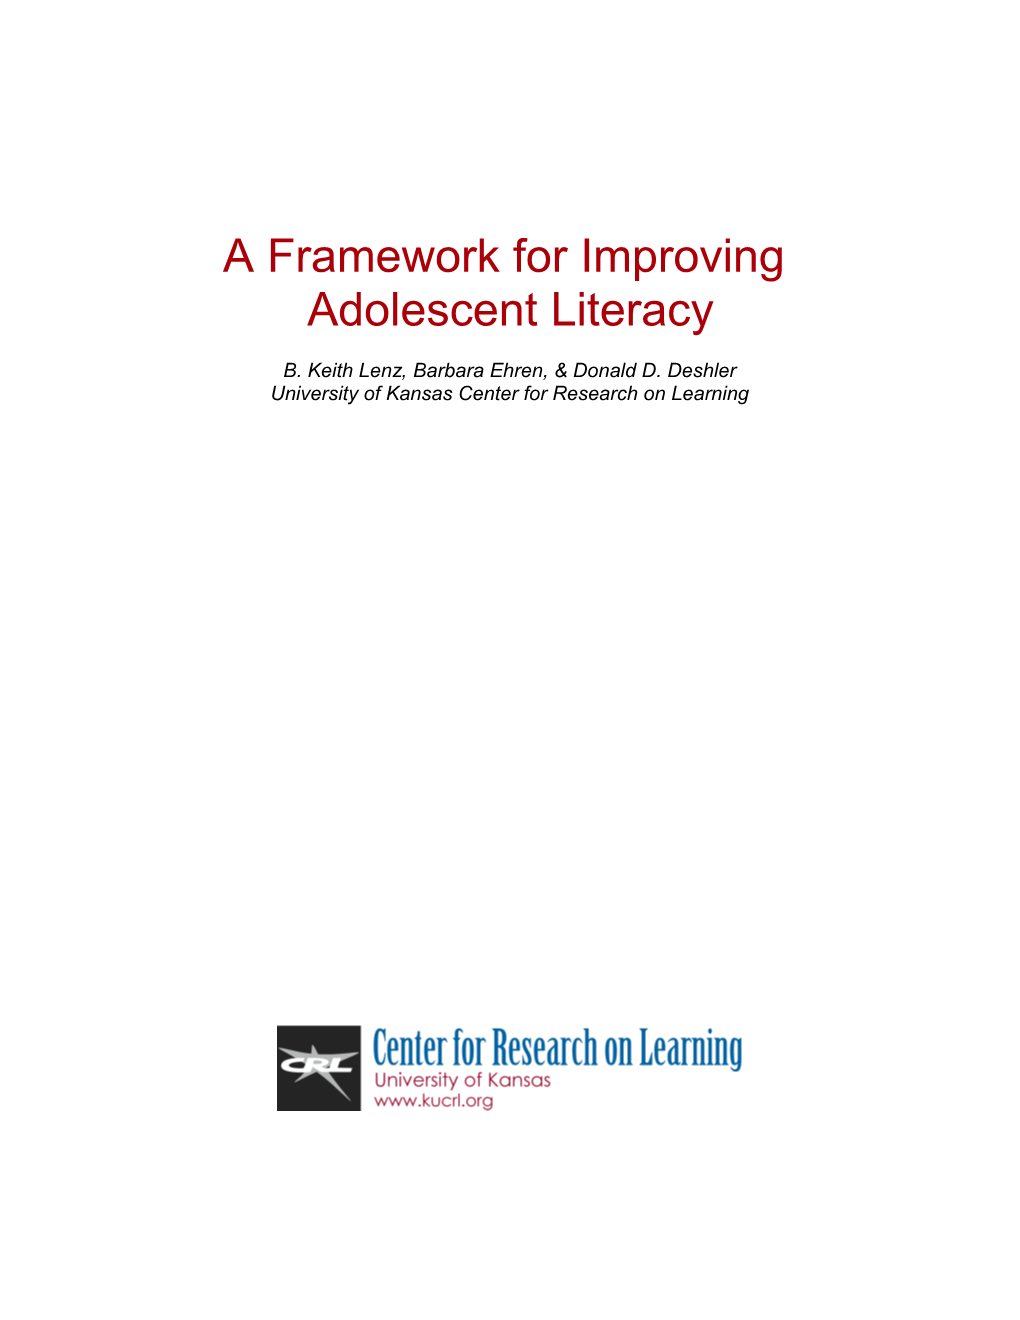 A Framework for Improving Adolescent Literacy